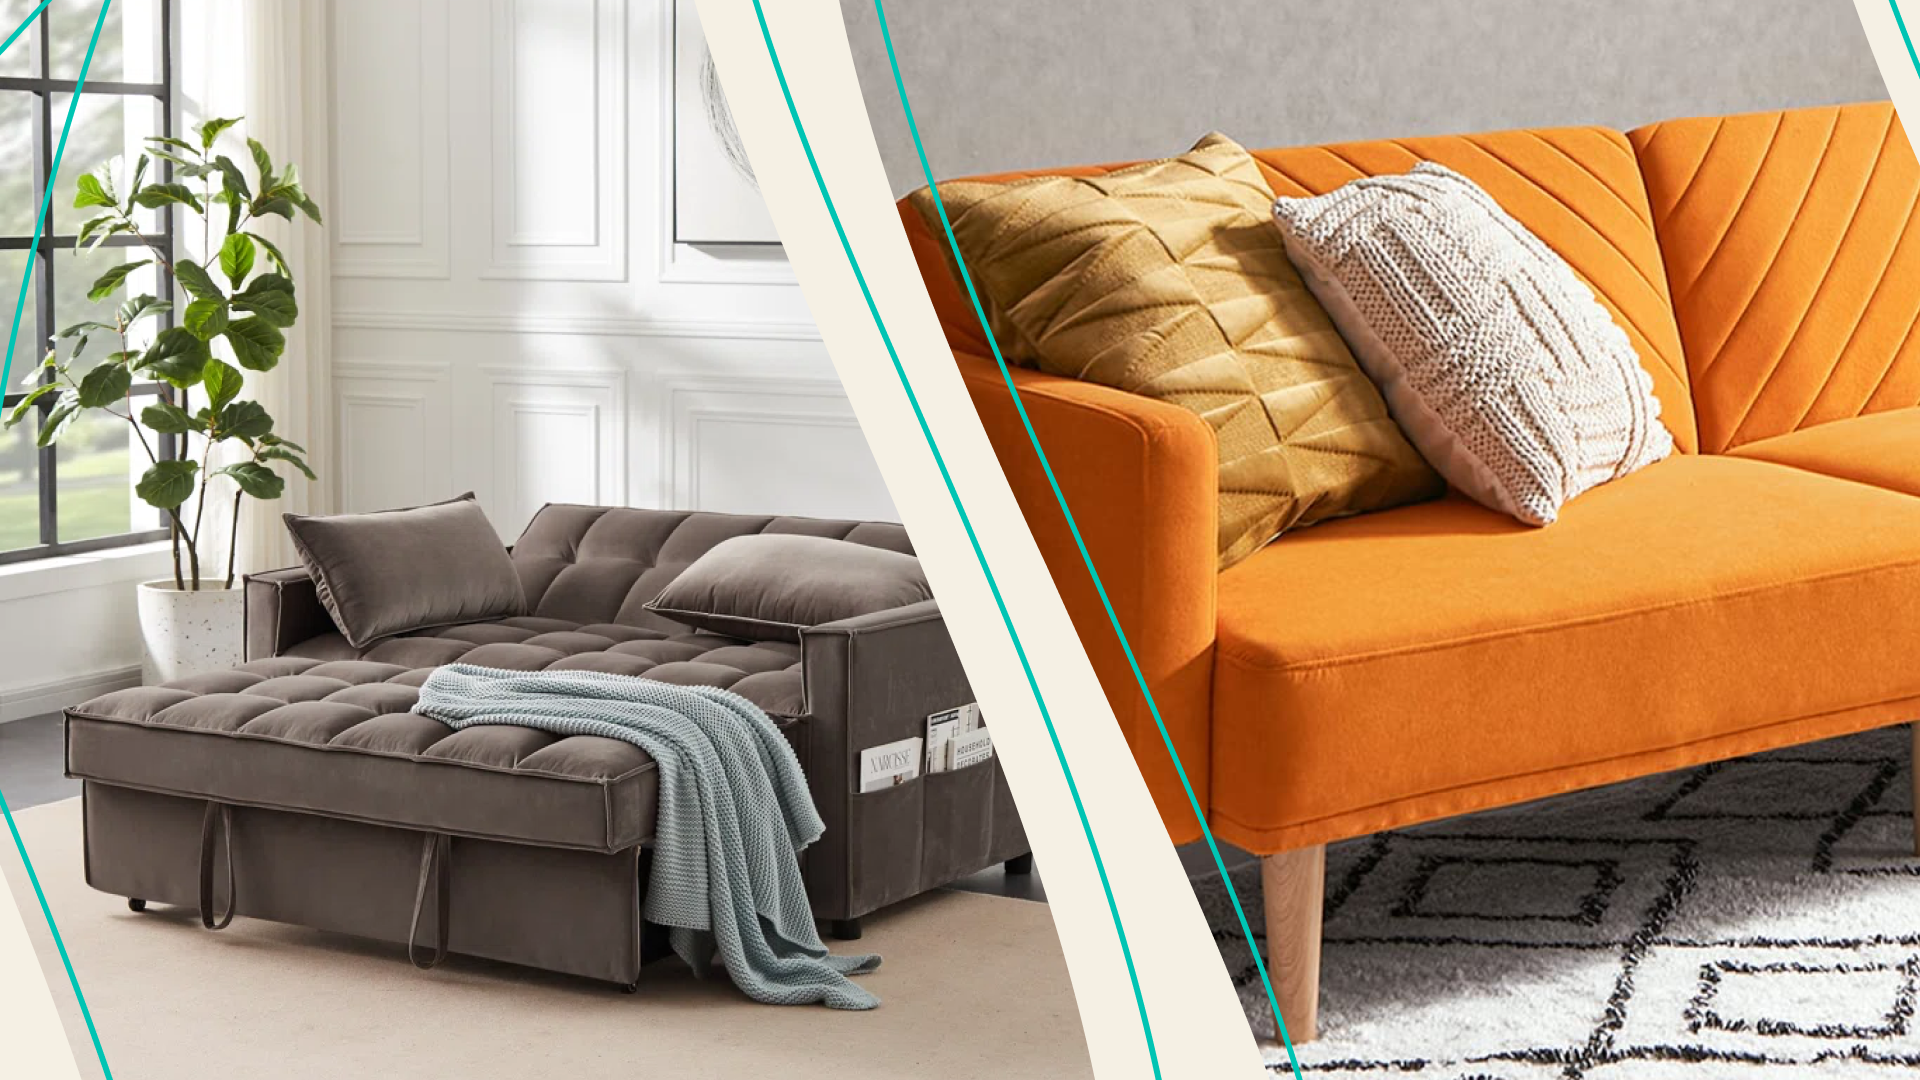 Sofa Beds, Daybeds, and Futons for Every Price Point